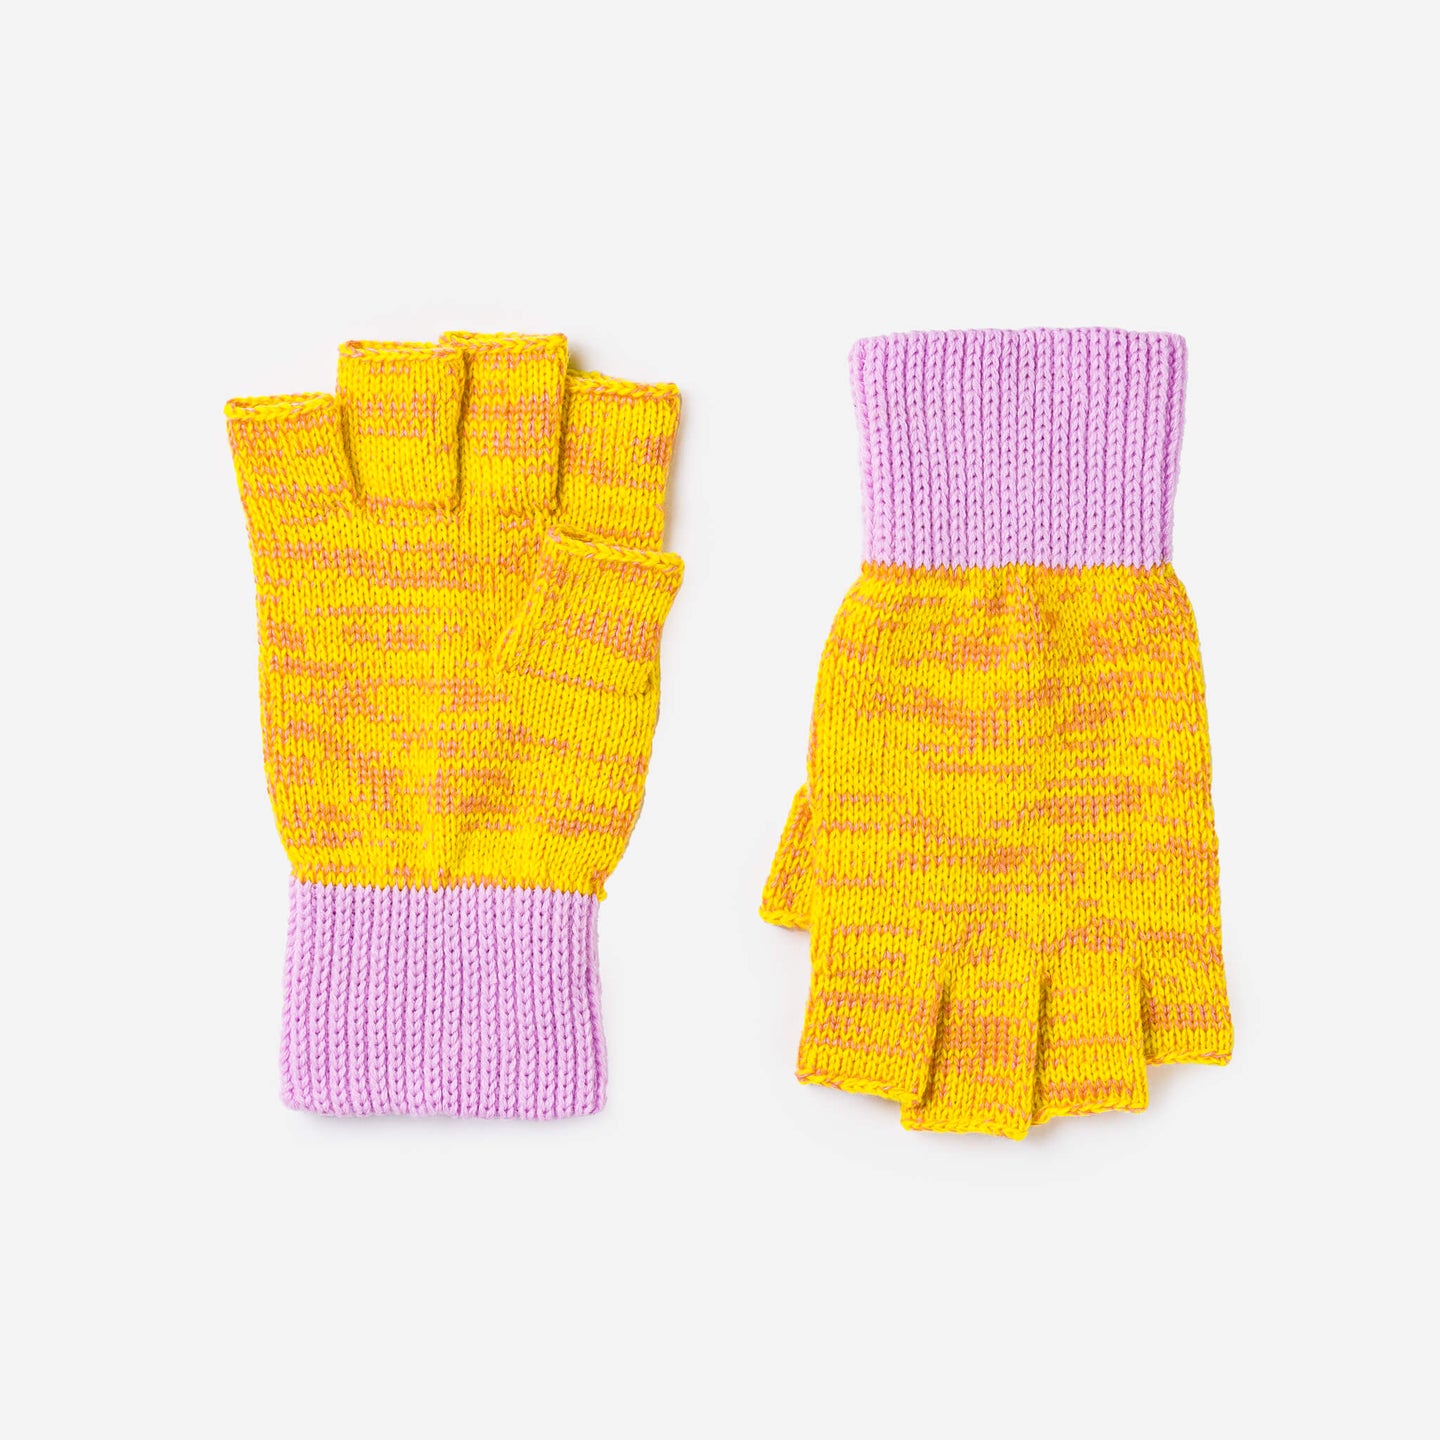 Colorblock Marled Knit Soft Fingerless Glove Cute Pink